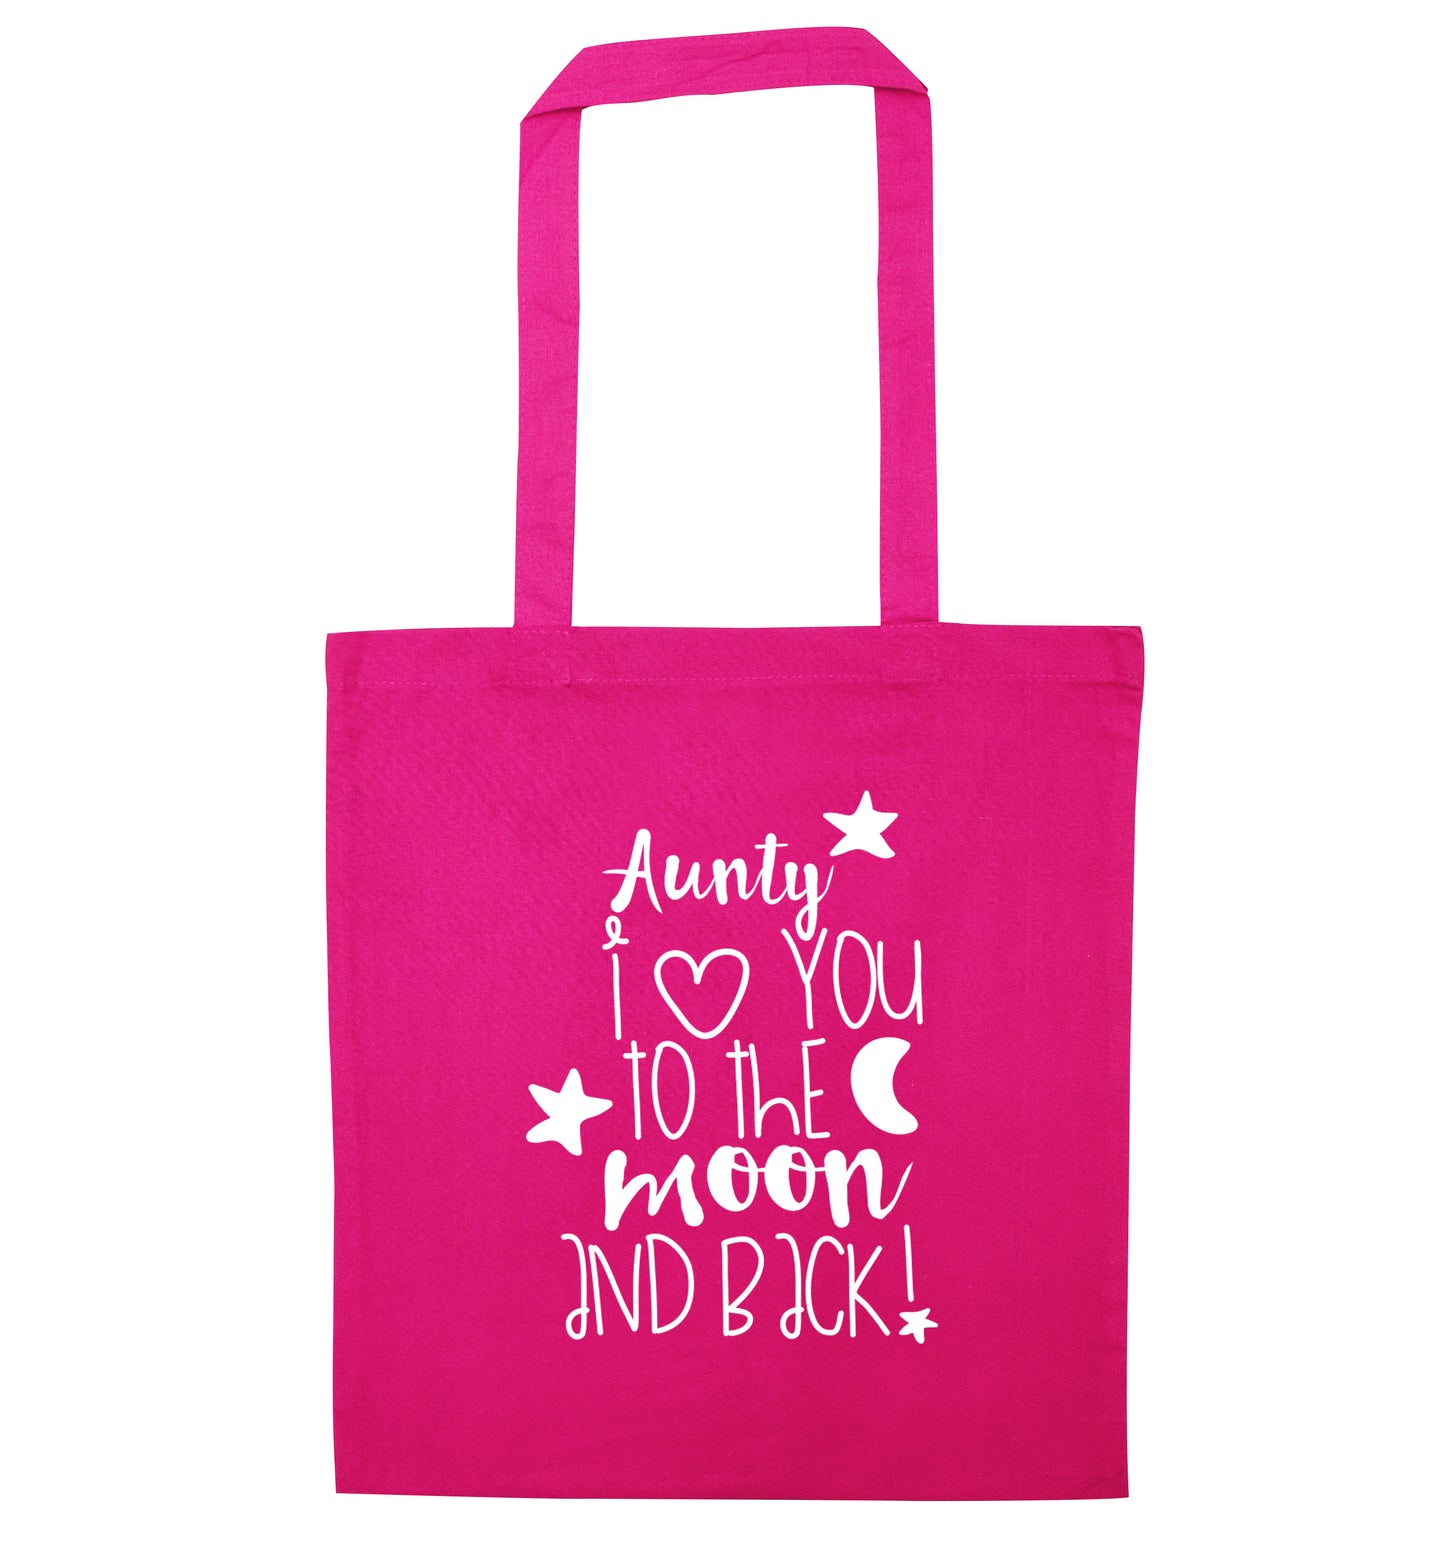 Aunty I love you to the moon and back pink tote bag